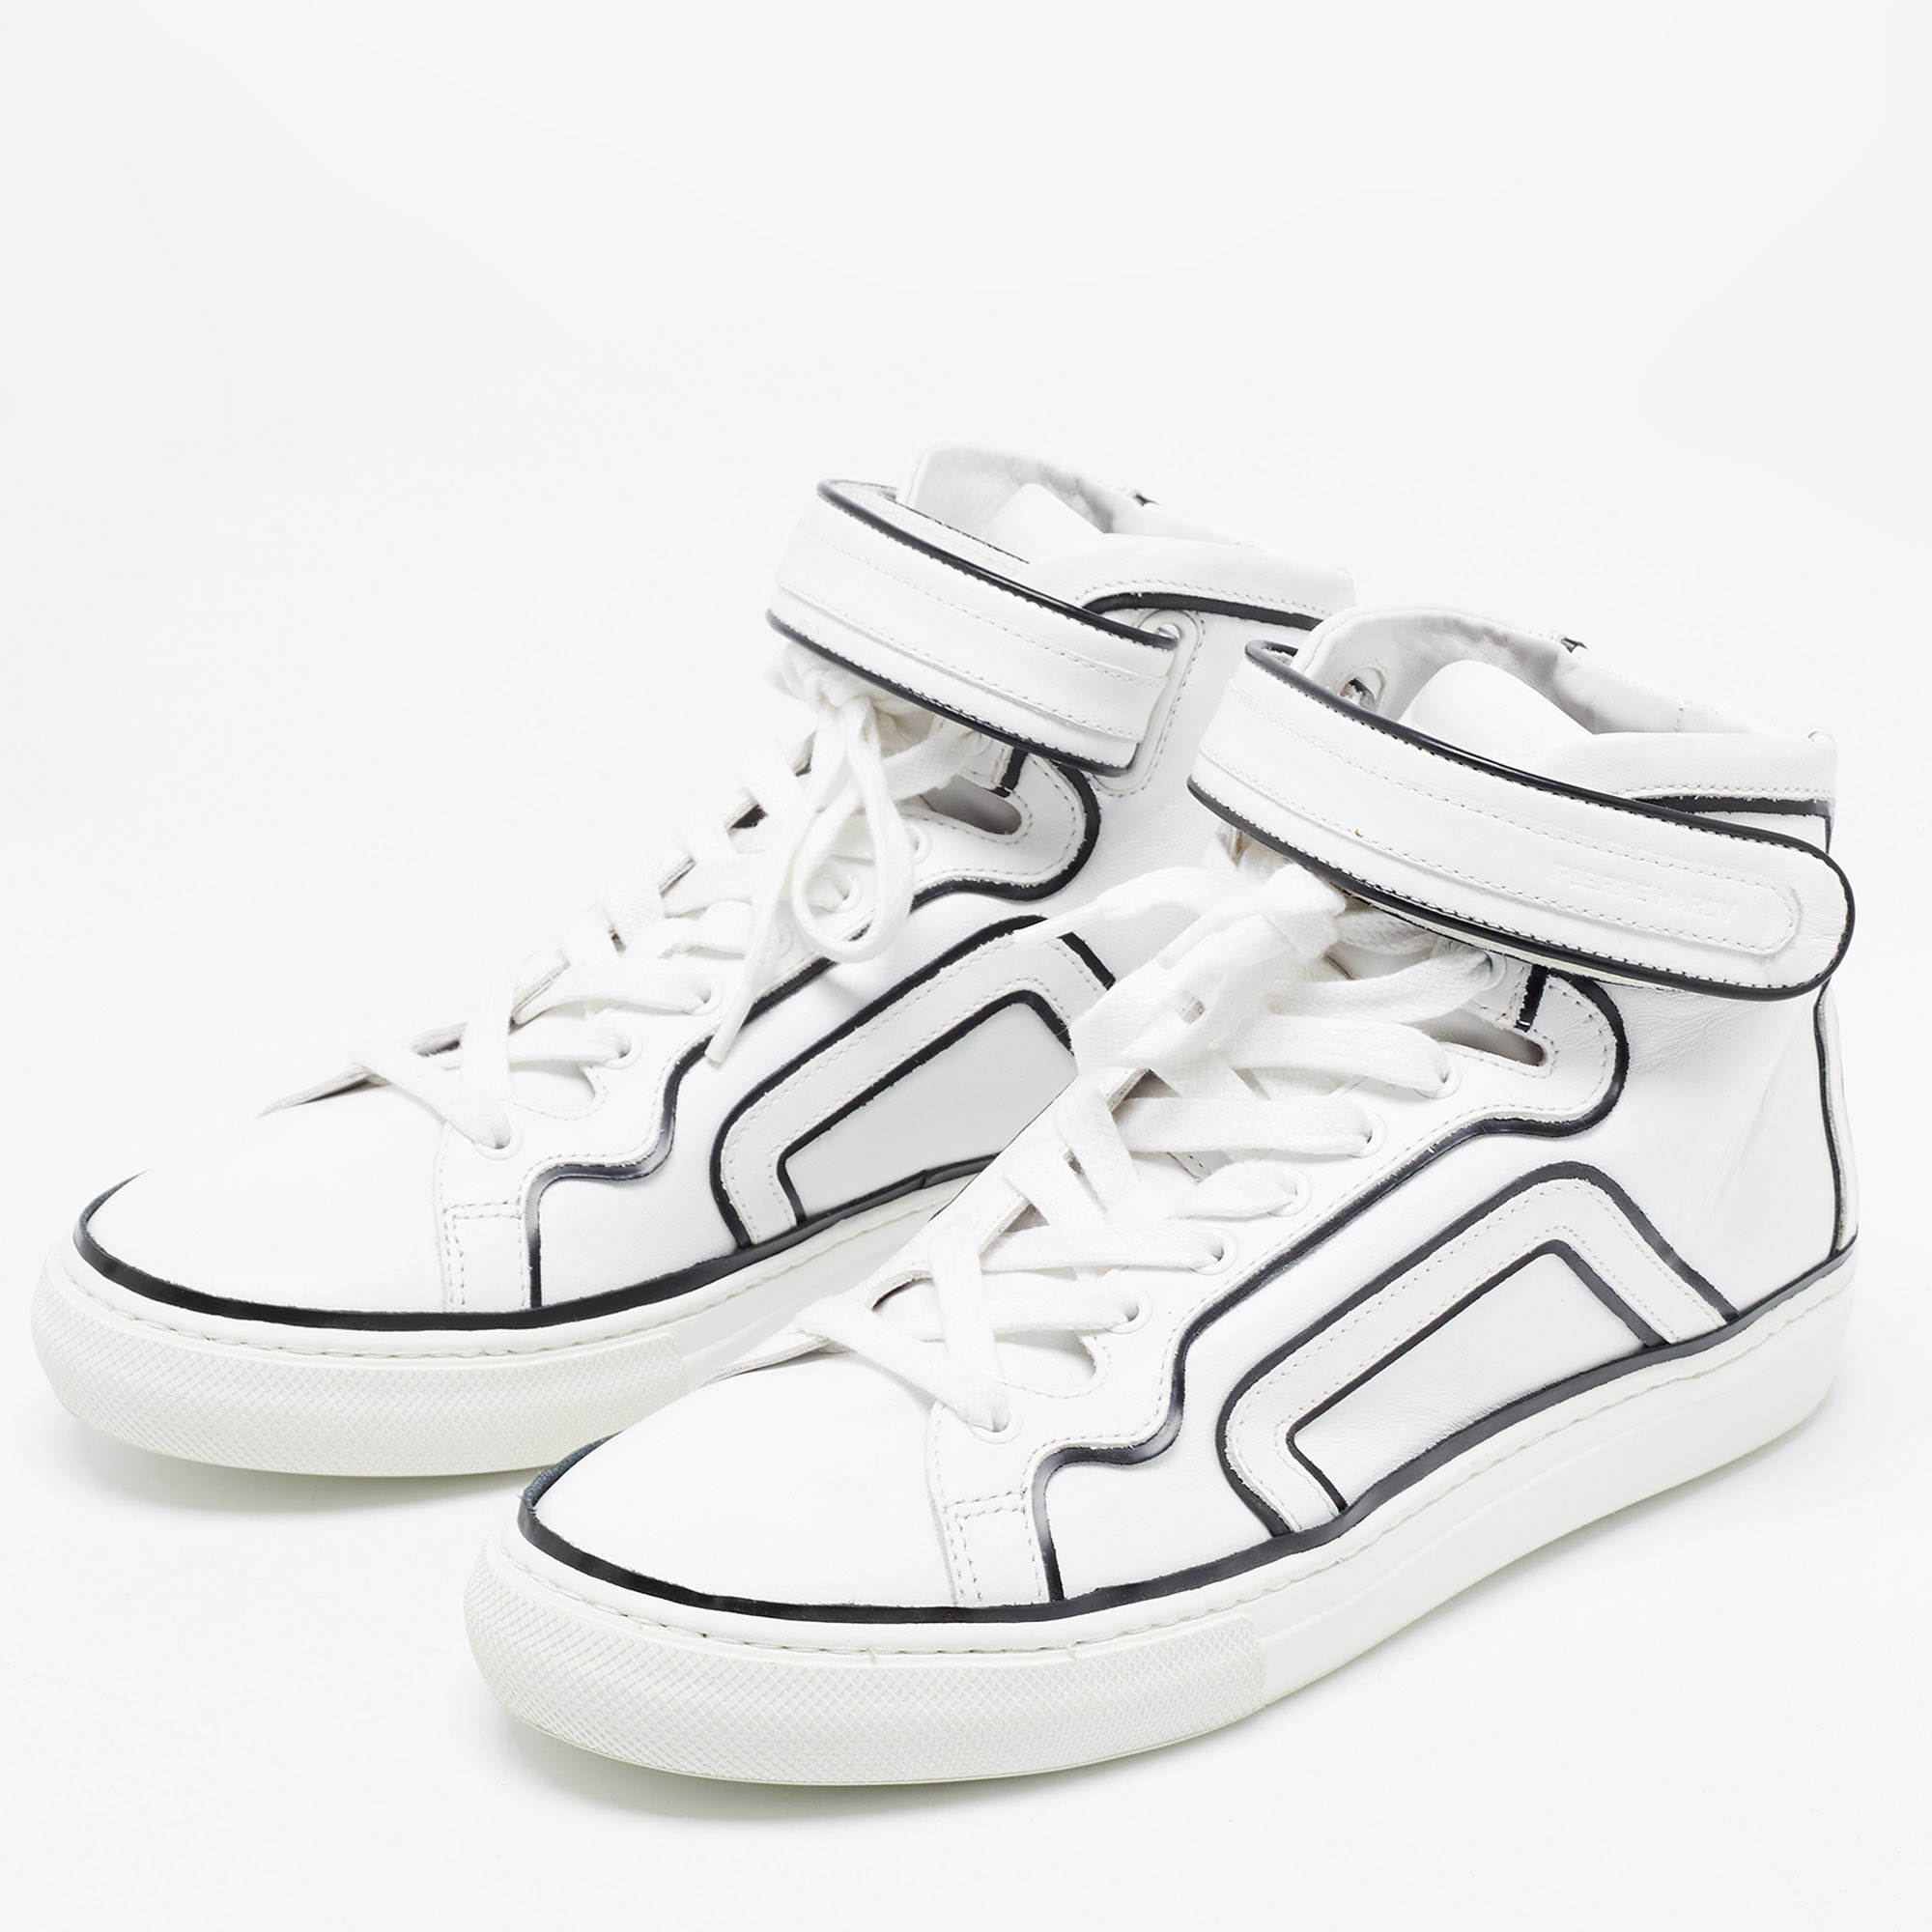 

Pierre Hardy White/Black Leather Trims 112 Match Leather High Top Sneakers Size